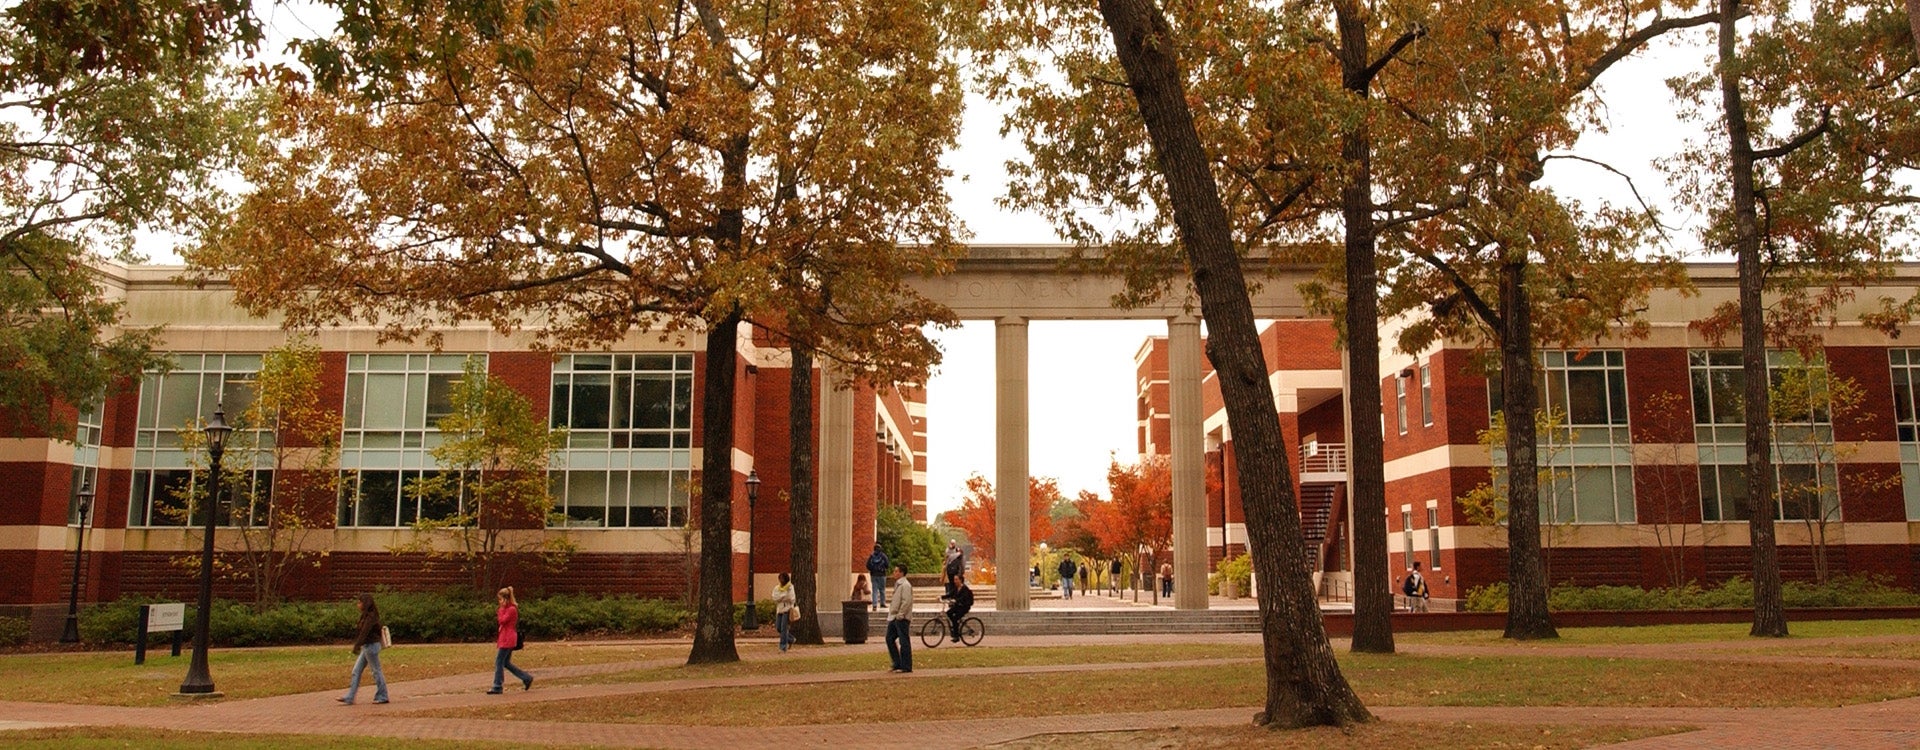 It is a fall day. Students are walking along a tree-lined path in front of buildings on ECU campus.